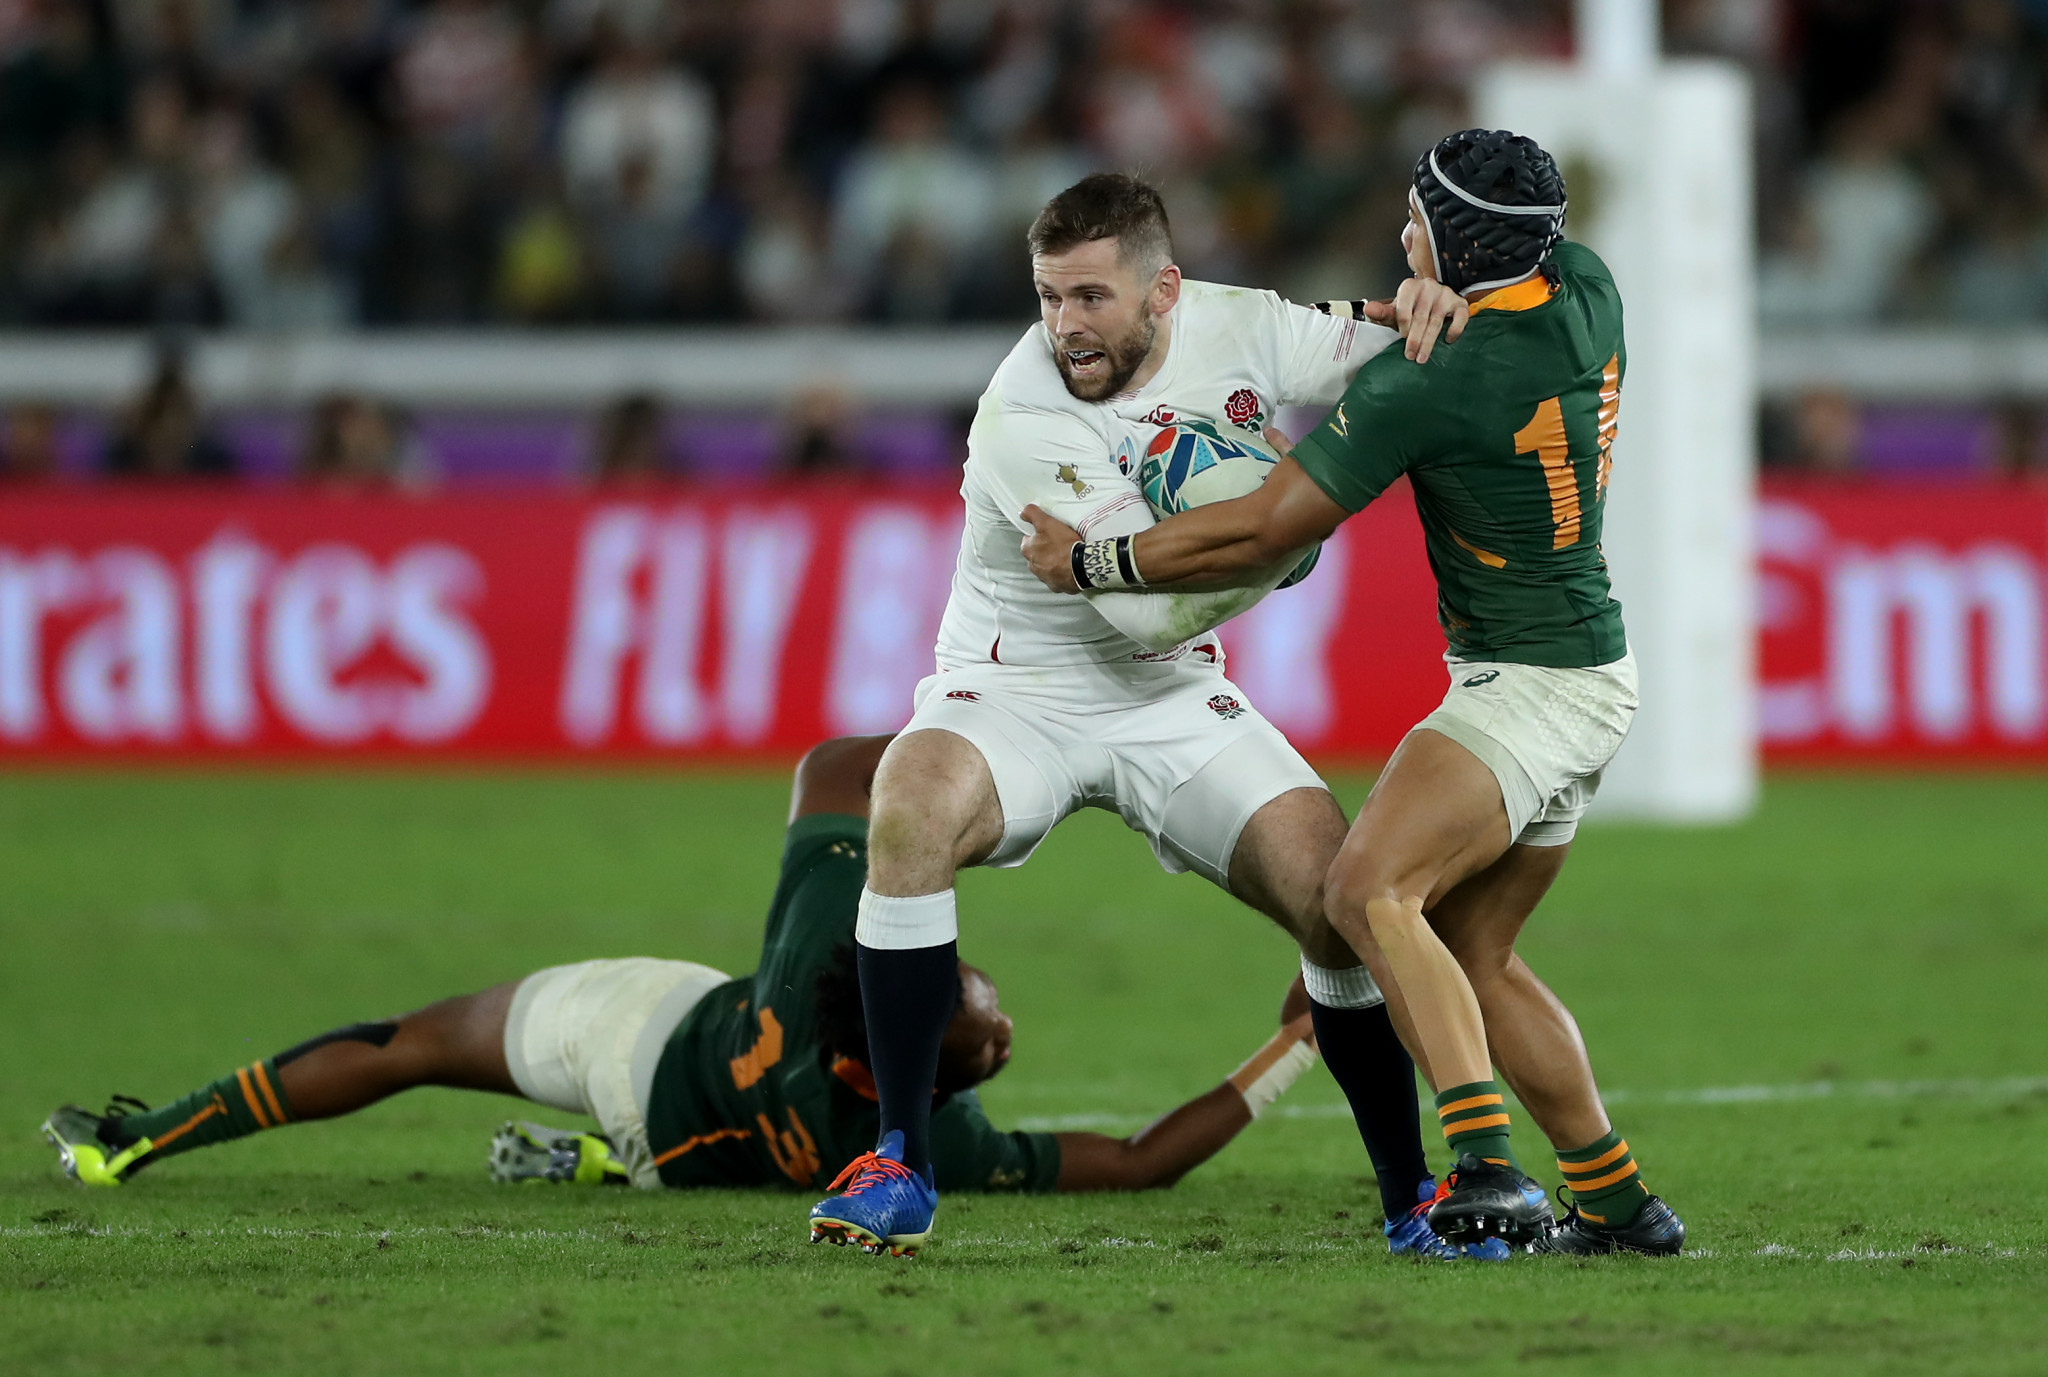 England's men's national team made the final of the 2019 World Cup where they lost to South Africa ©Getty Images